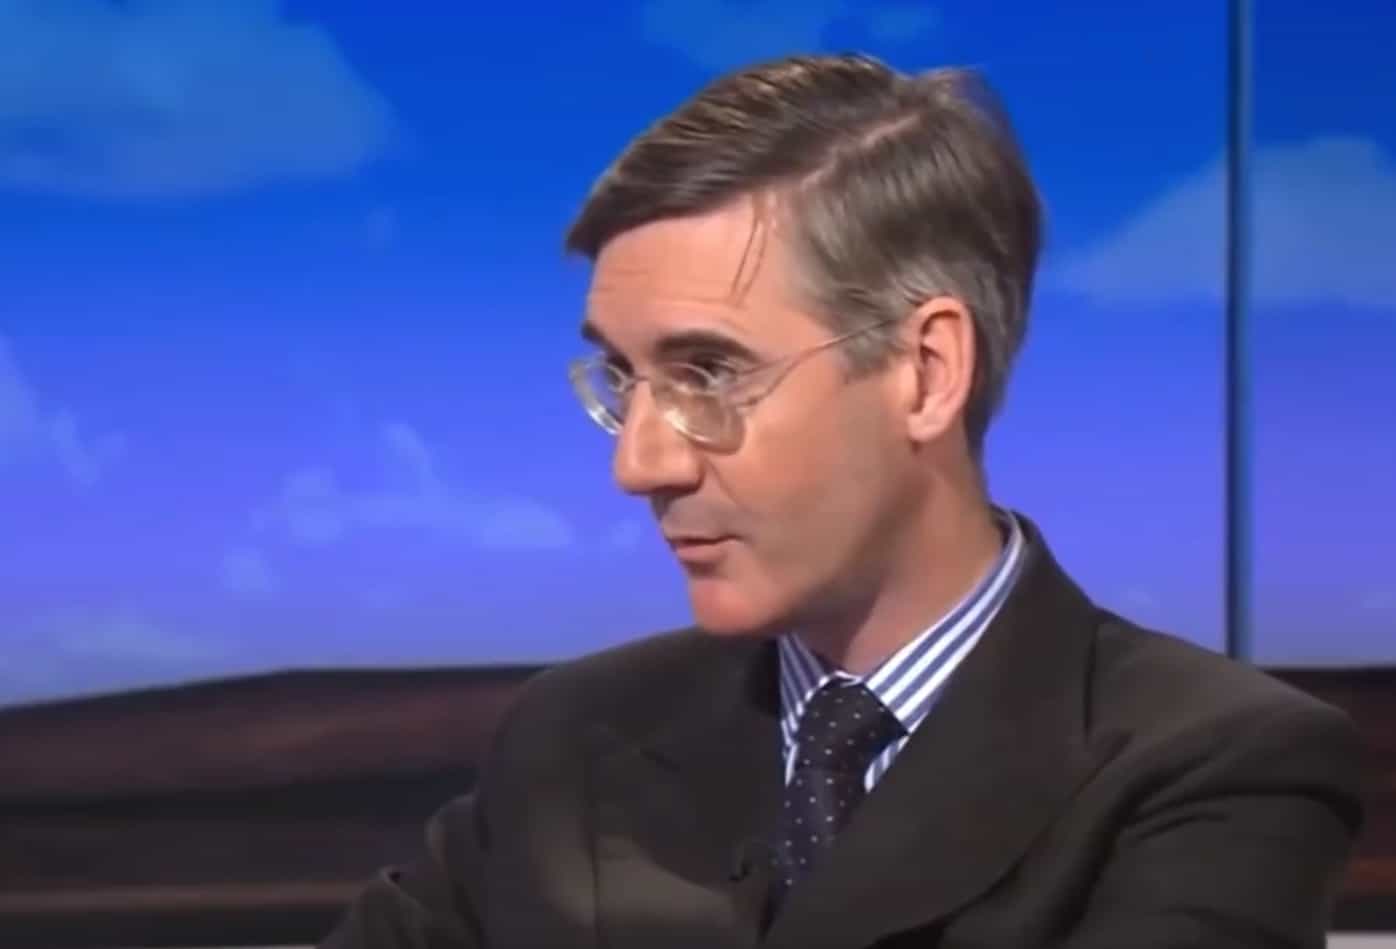 Jacob Rees-Mogg ‘considering running to be next leader of the Tory party’